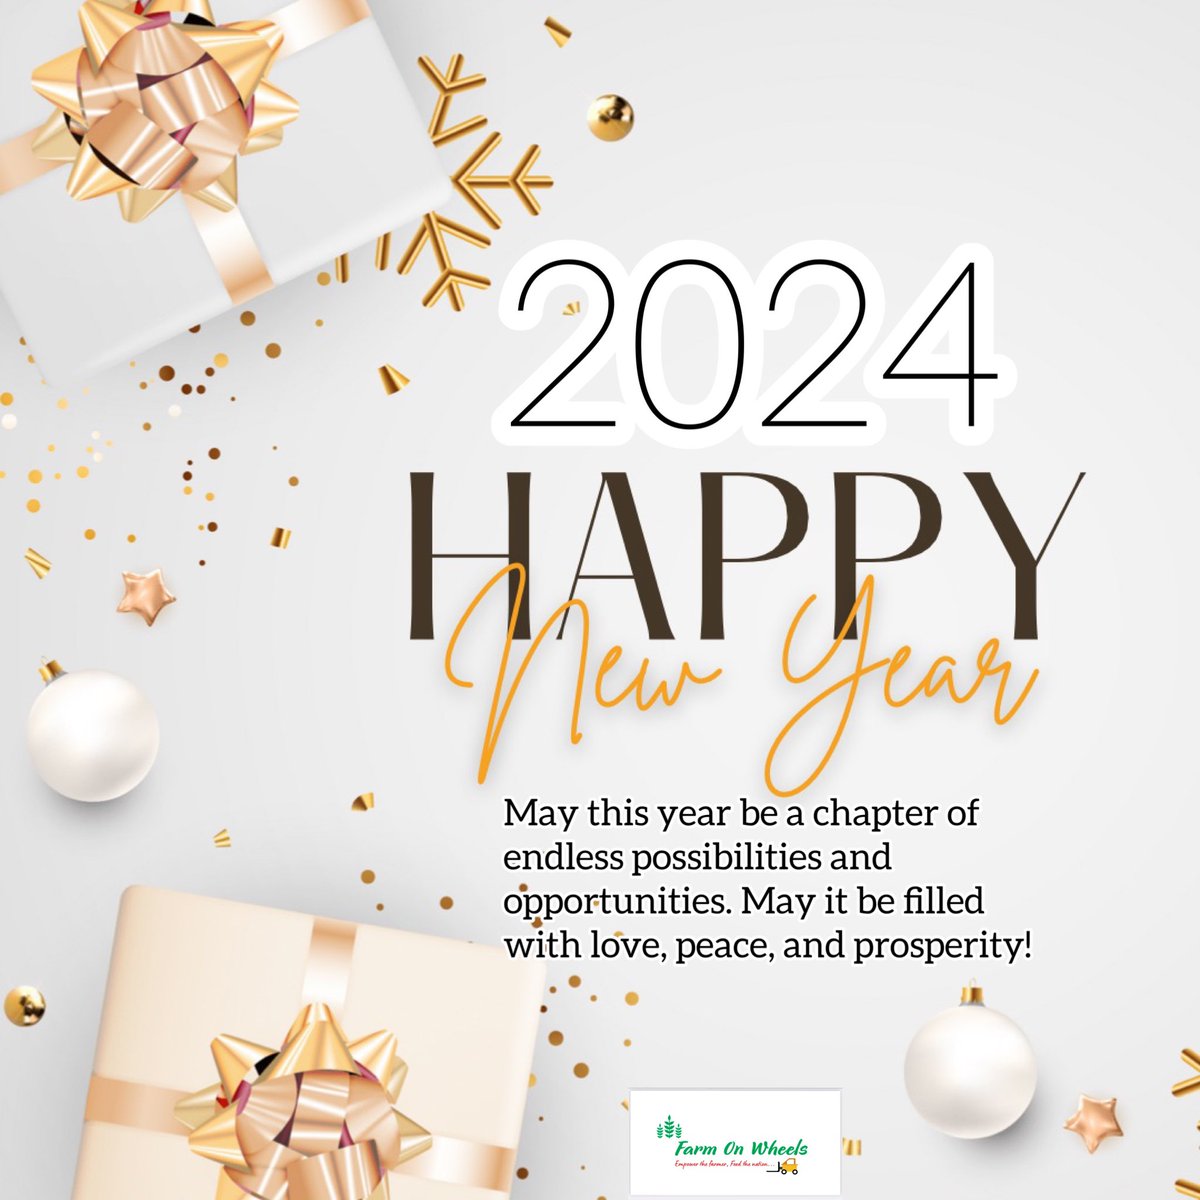 May this year be a chapter of endless possibilities and opportunities. May it be filled with love, peace, and prosperity!

Happy New Year from all of us. @ Farm on Wheels

#farmonwheels #2024 #AgriSuccess